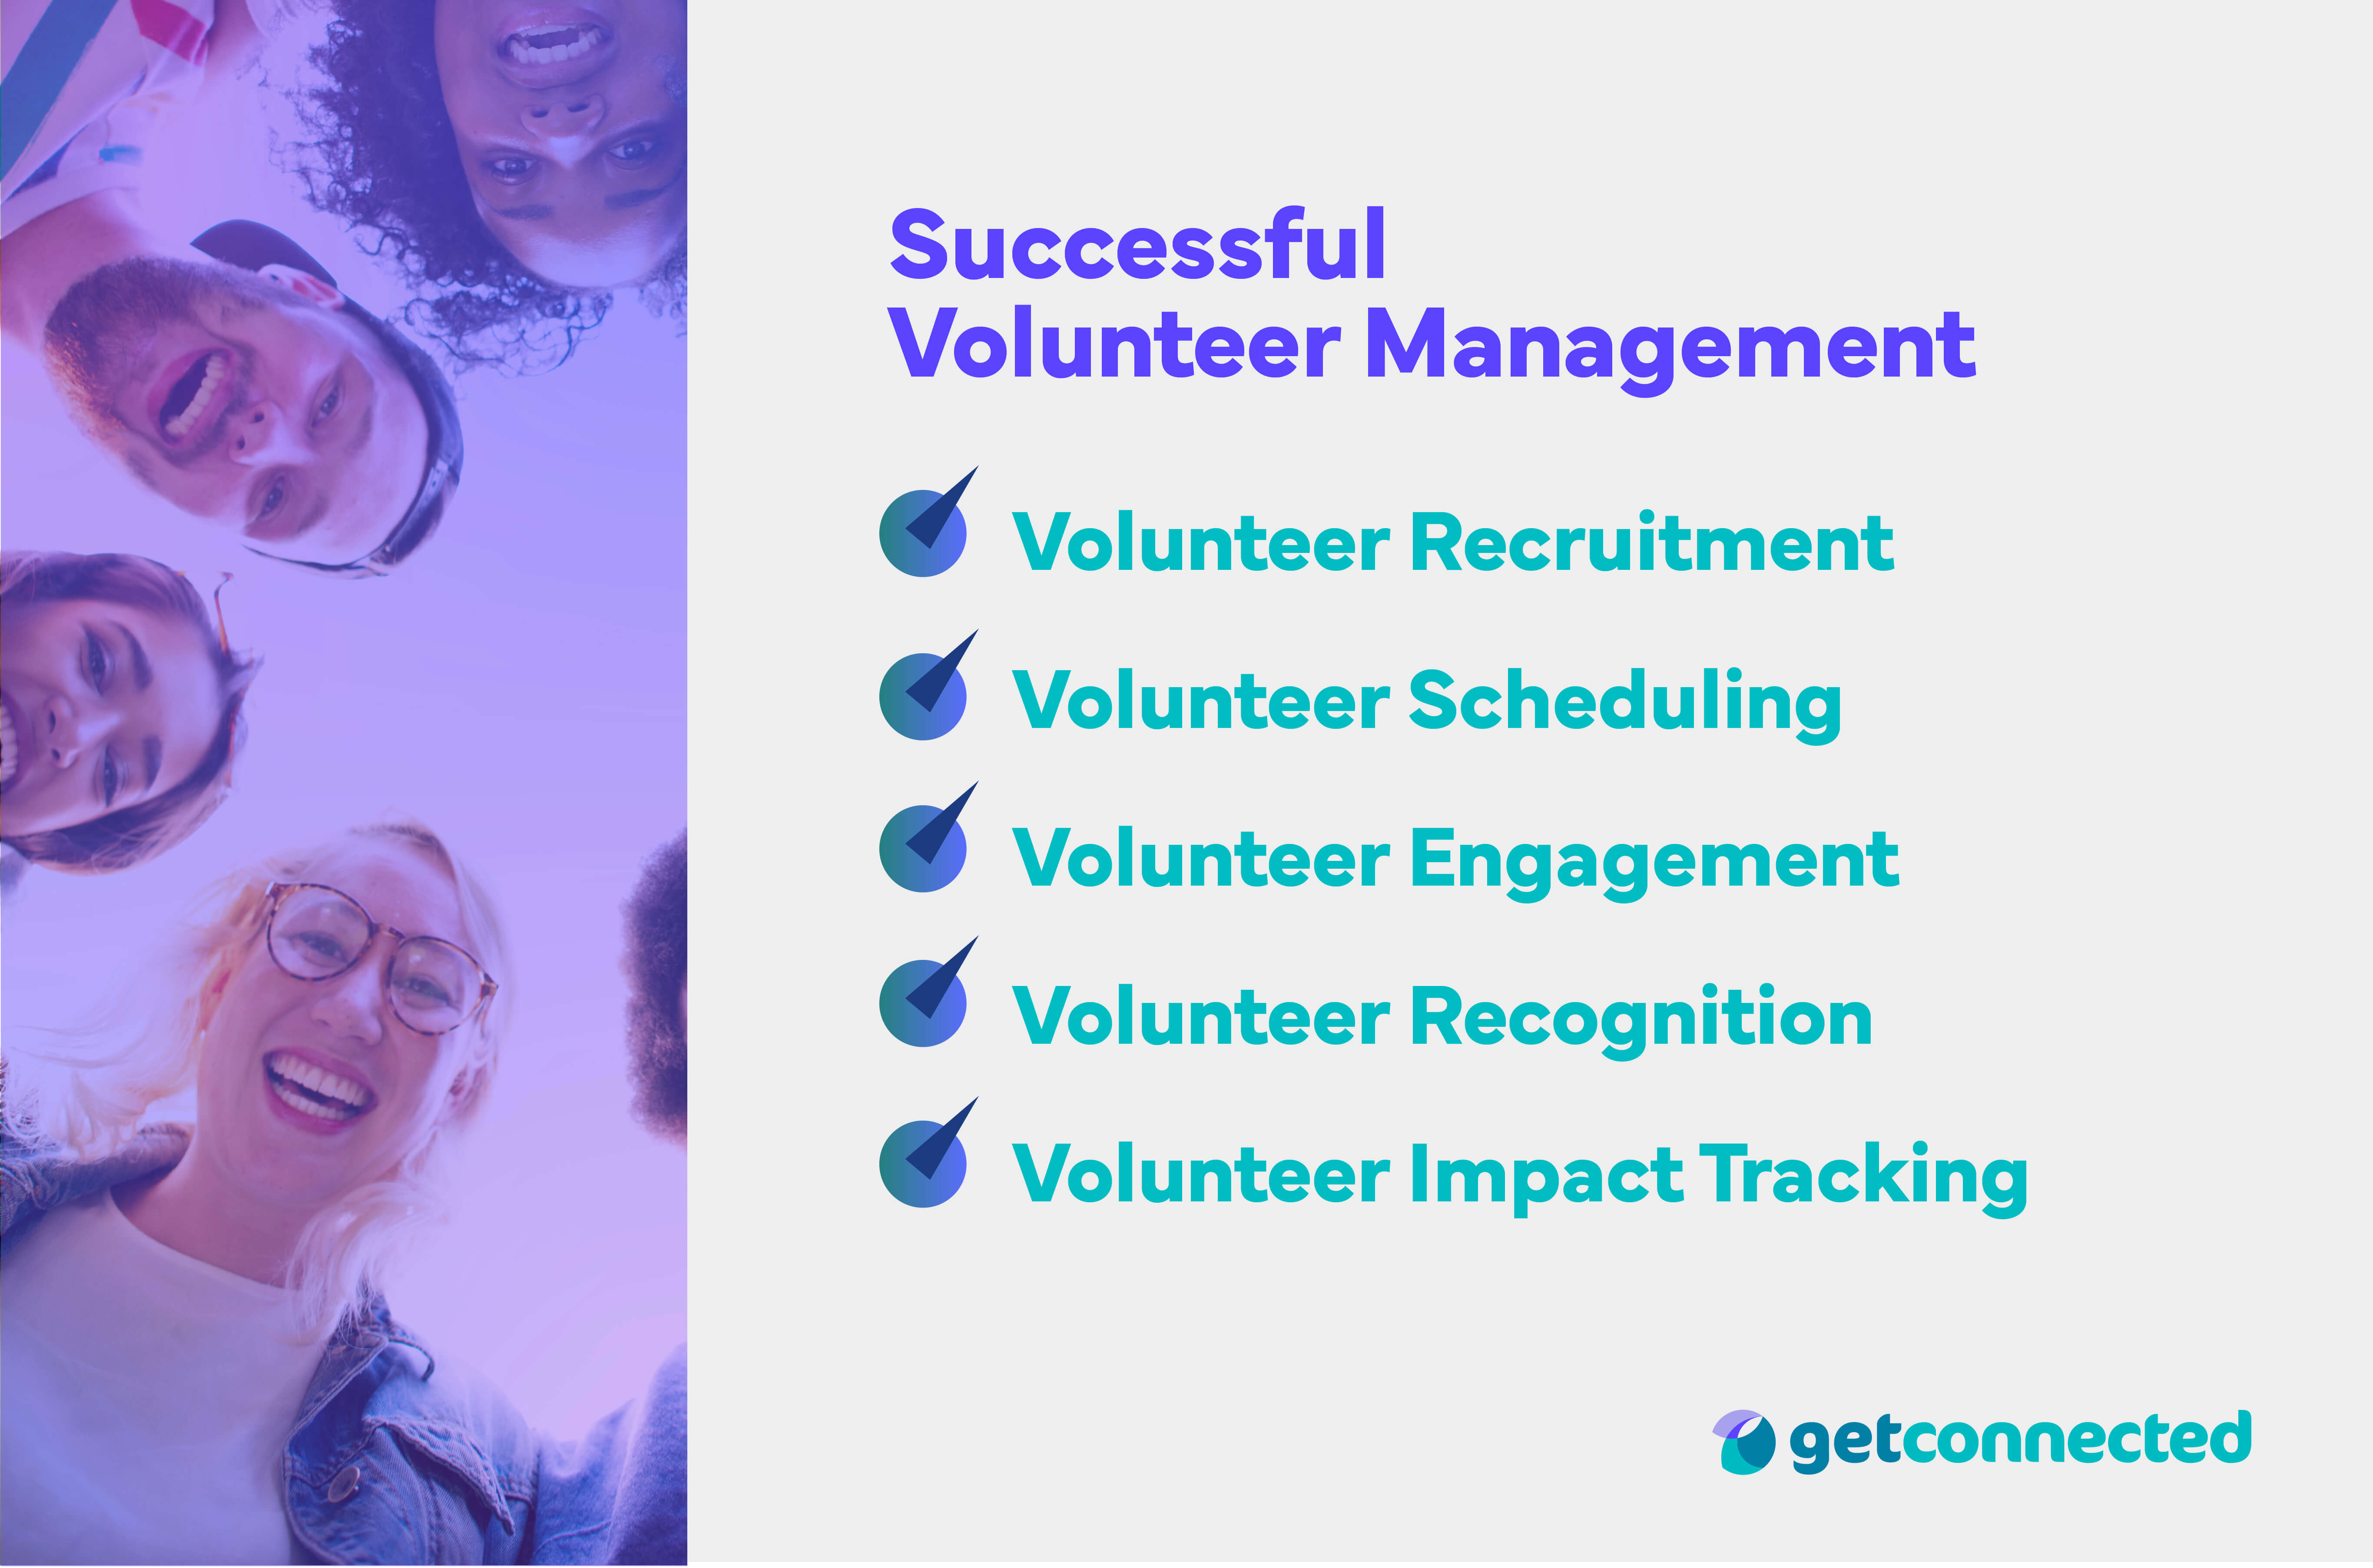 How to start a volunteer program and a list of successful volunteer management strategies